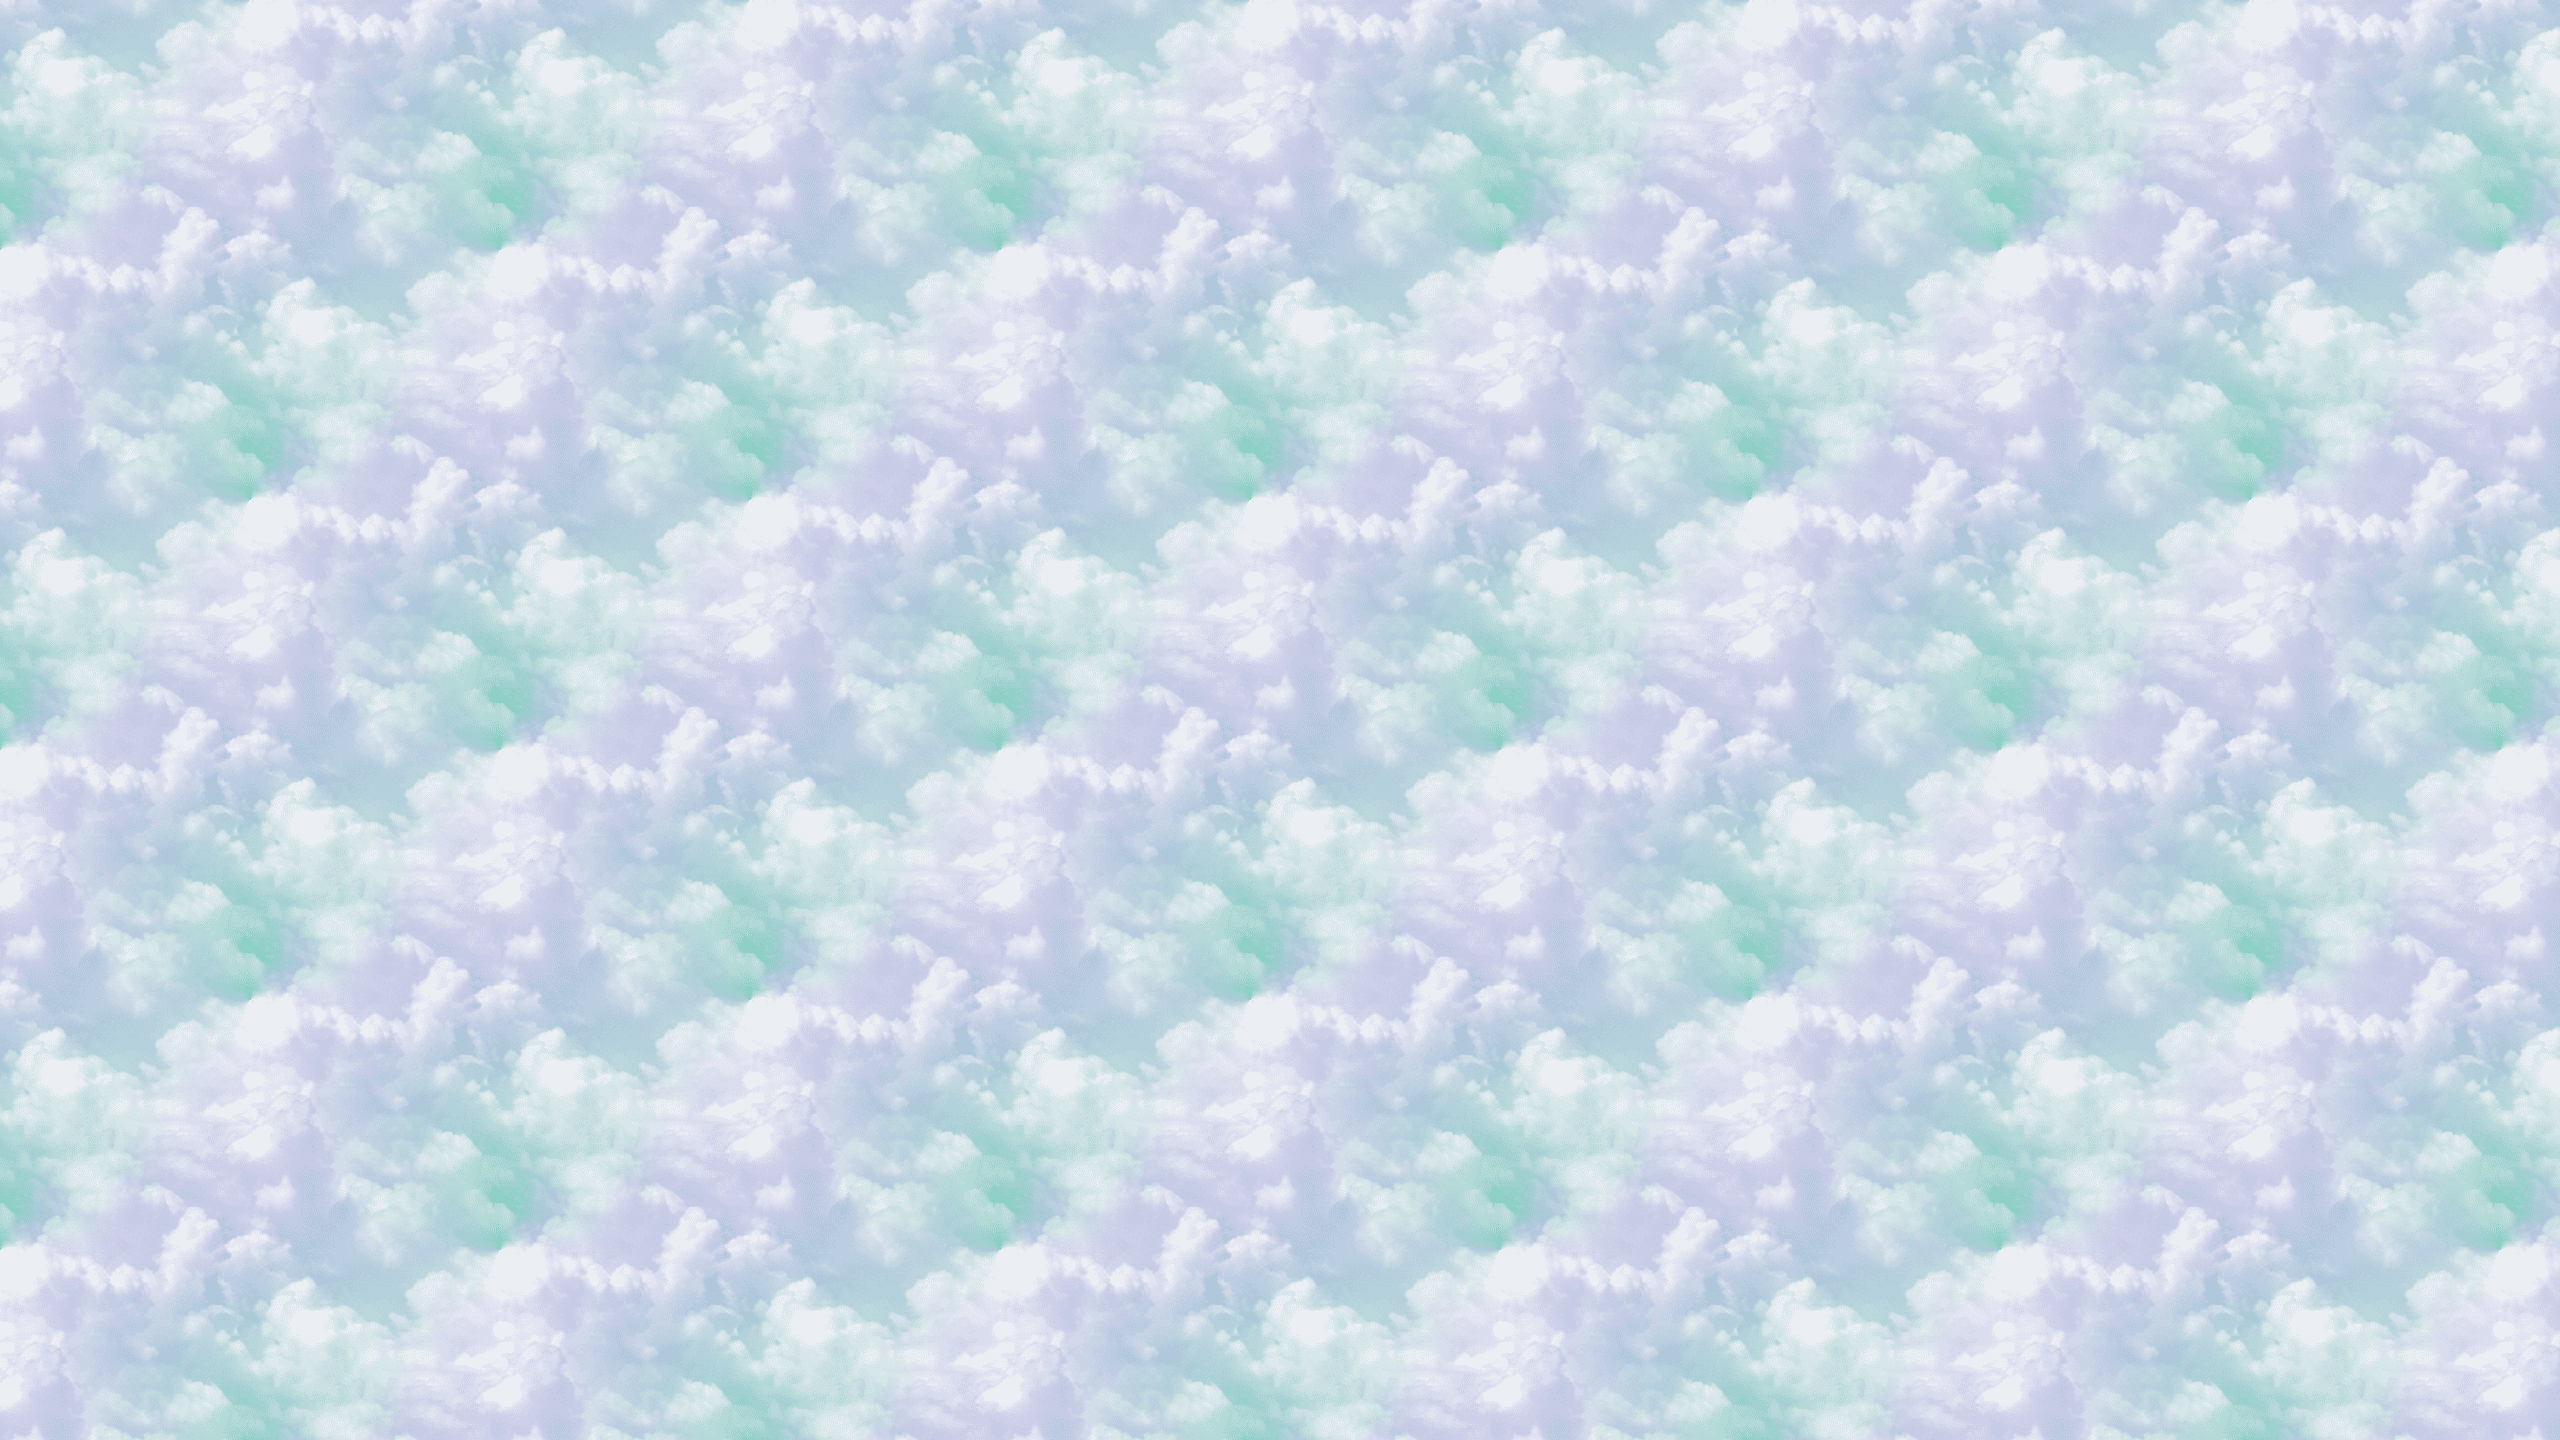 Free download Pastel Clouds Tumblr Background Pastel clouds